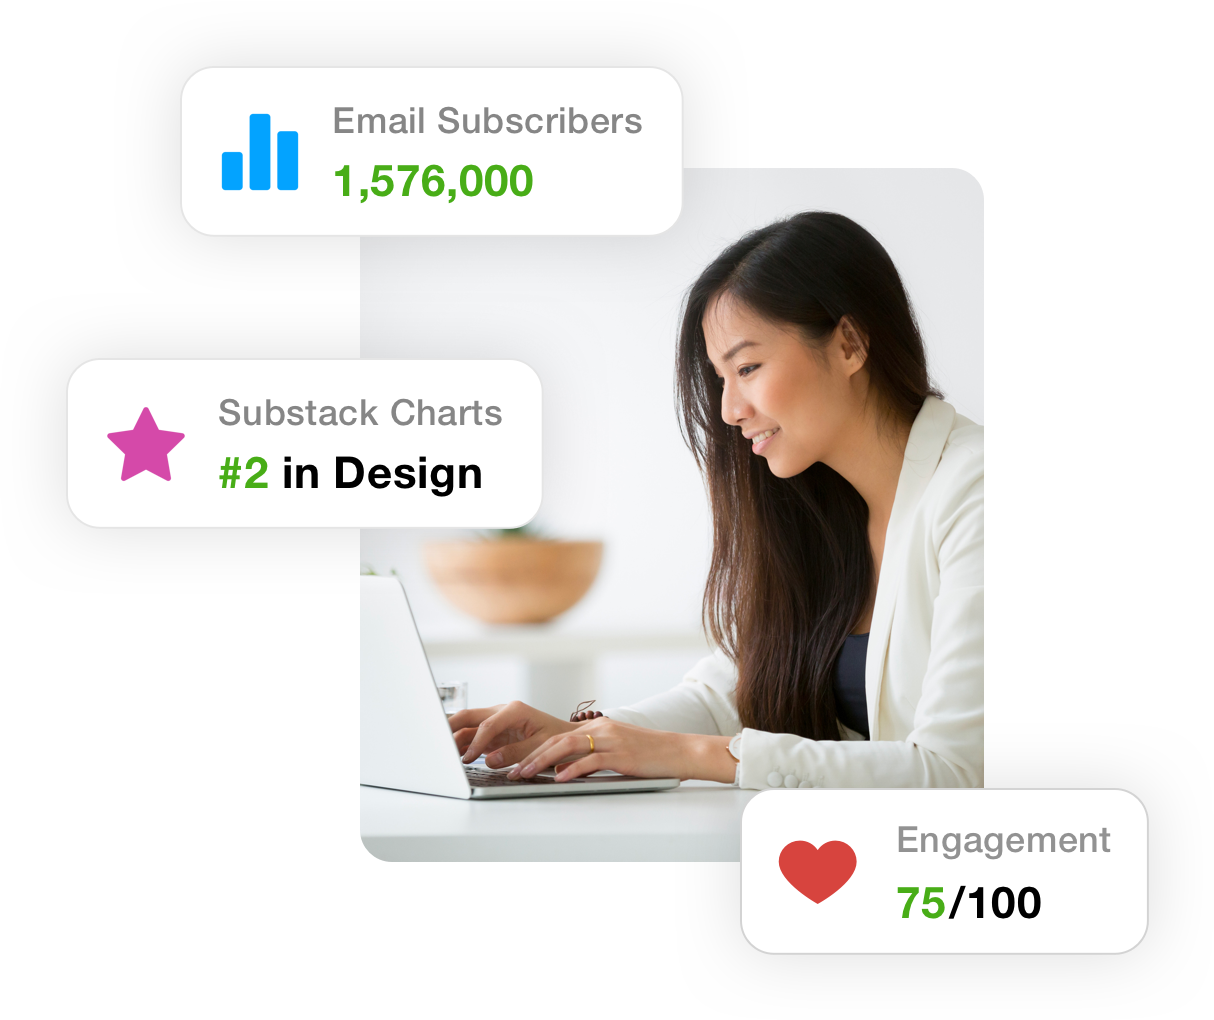 Newsletter subscriber numbers, chart rankings and engagement scores.